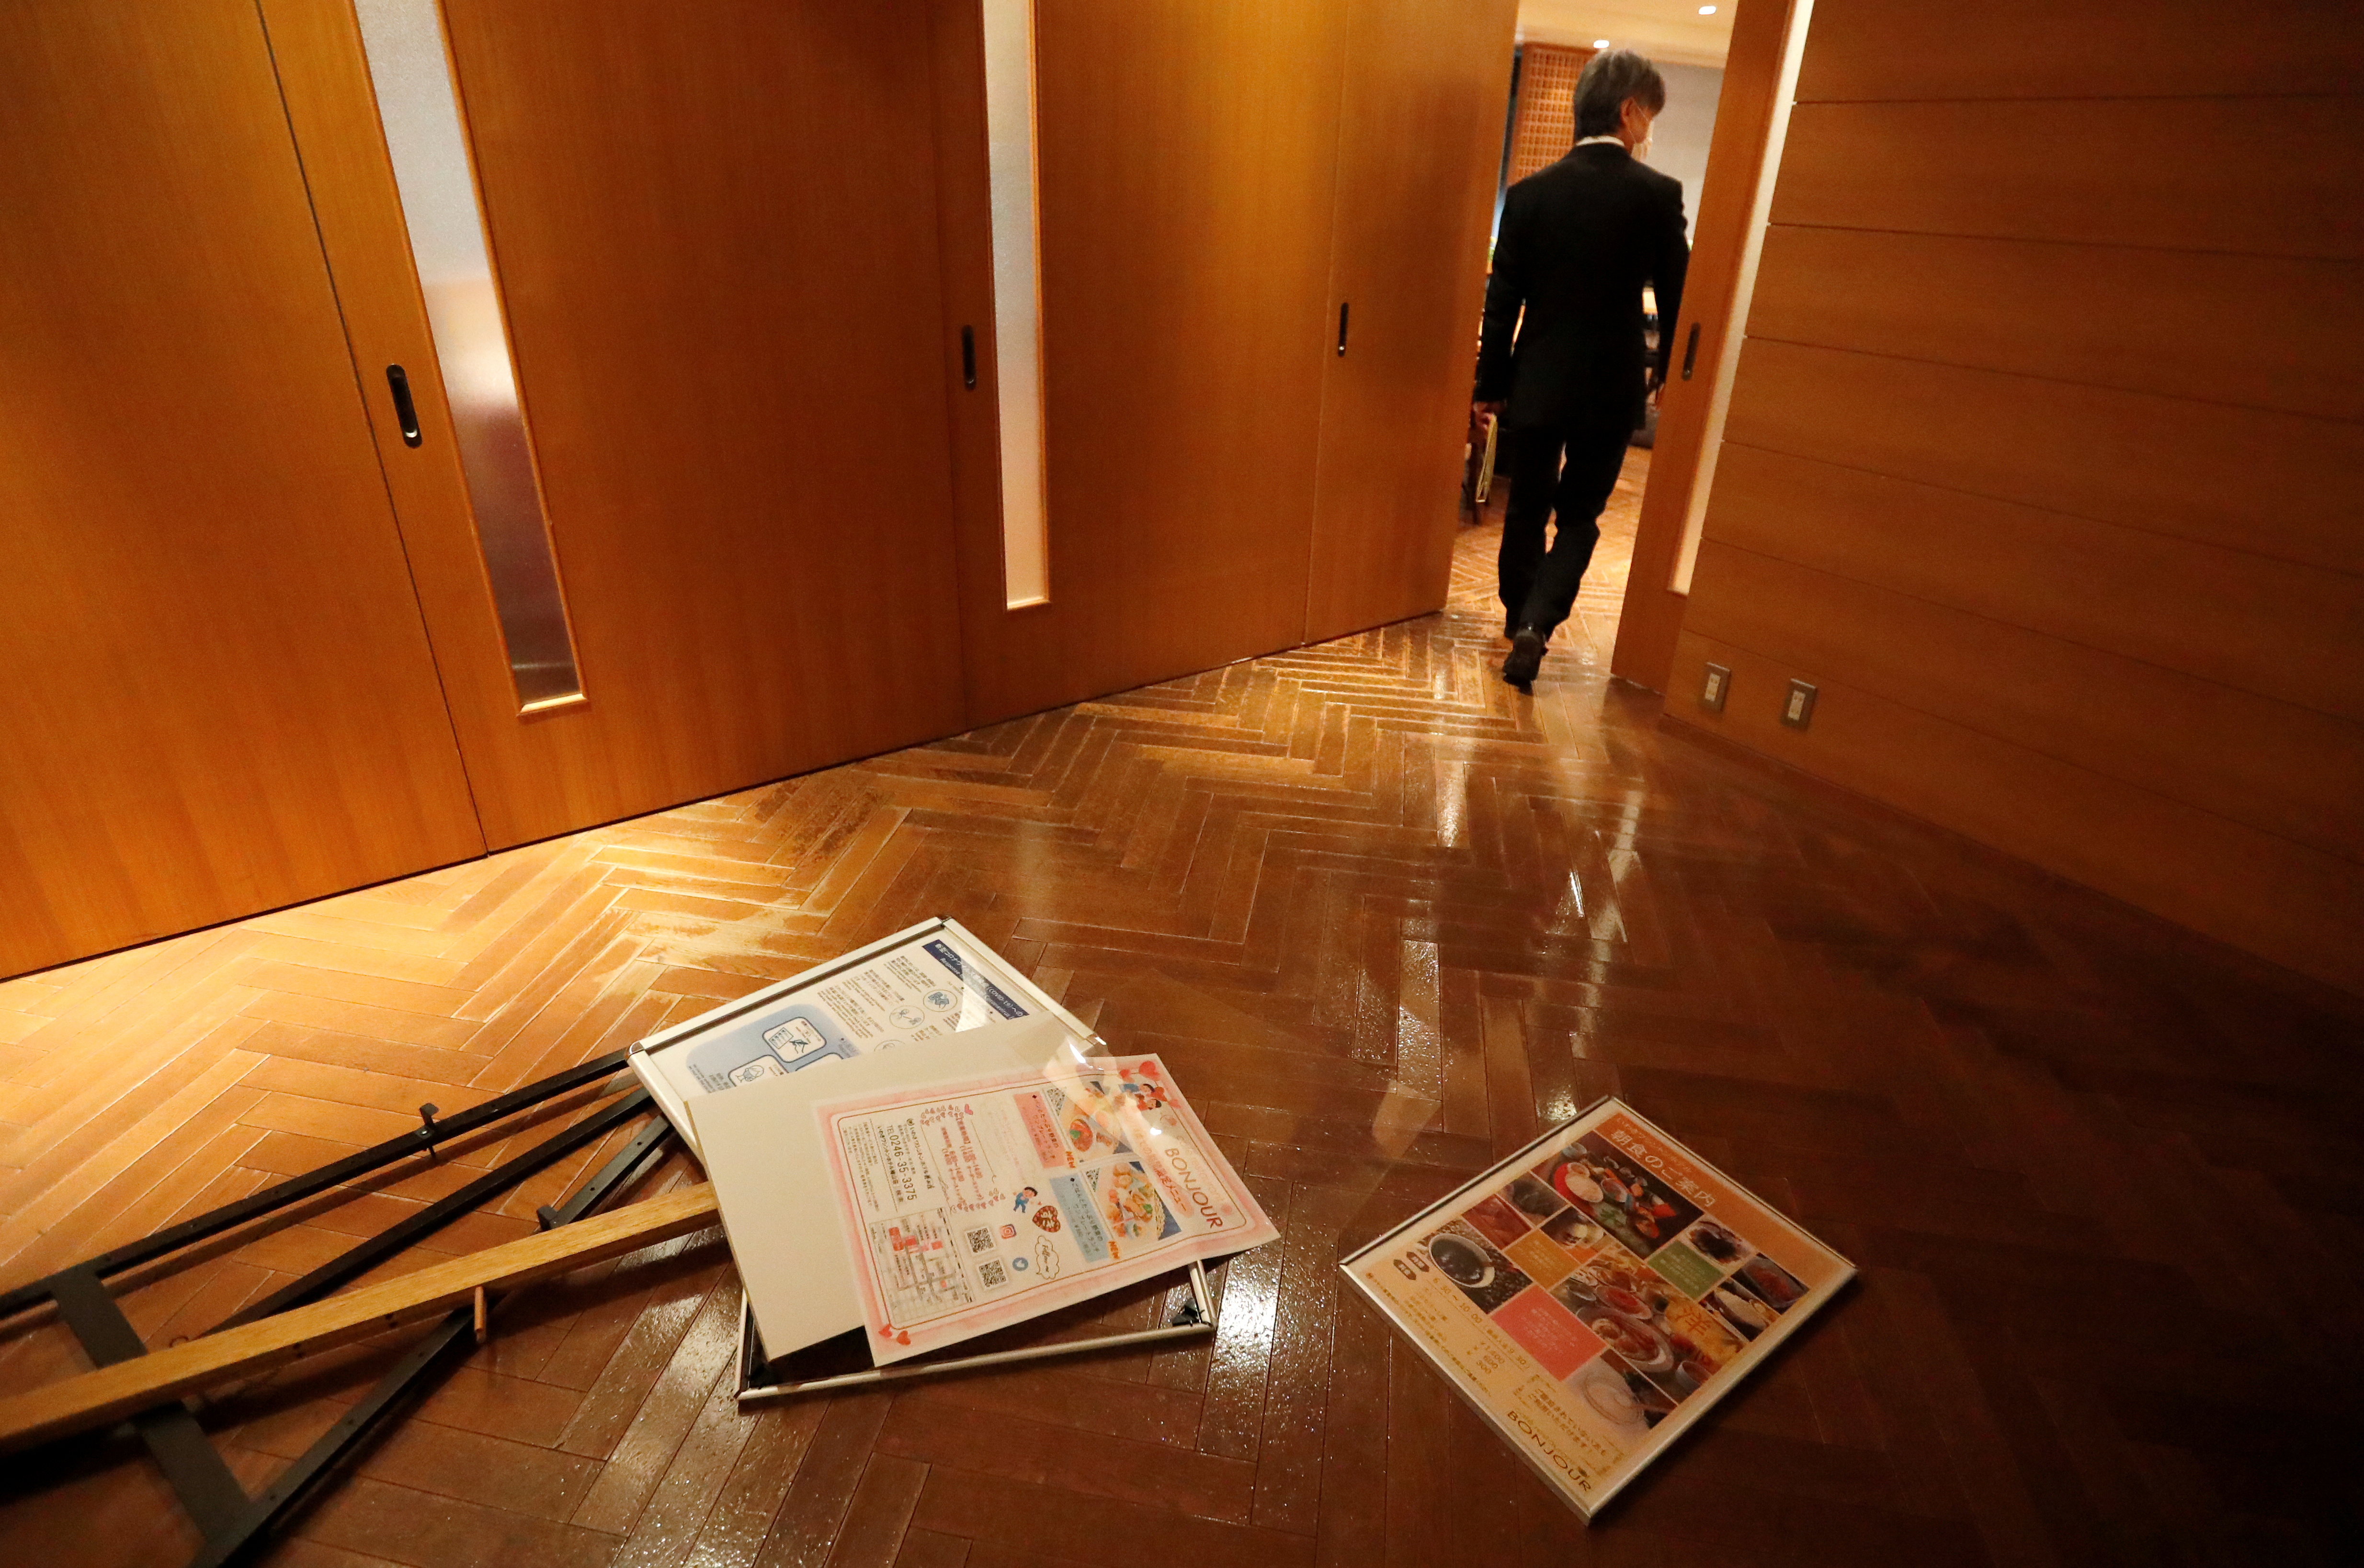 Posters lie on the floor after they fell from the walls of a hotel following a strong earthquake in Iwaki, Fukushima prefecture, Japan February 13, 2021.  REUTERS/Issei Kato